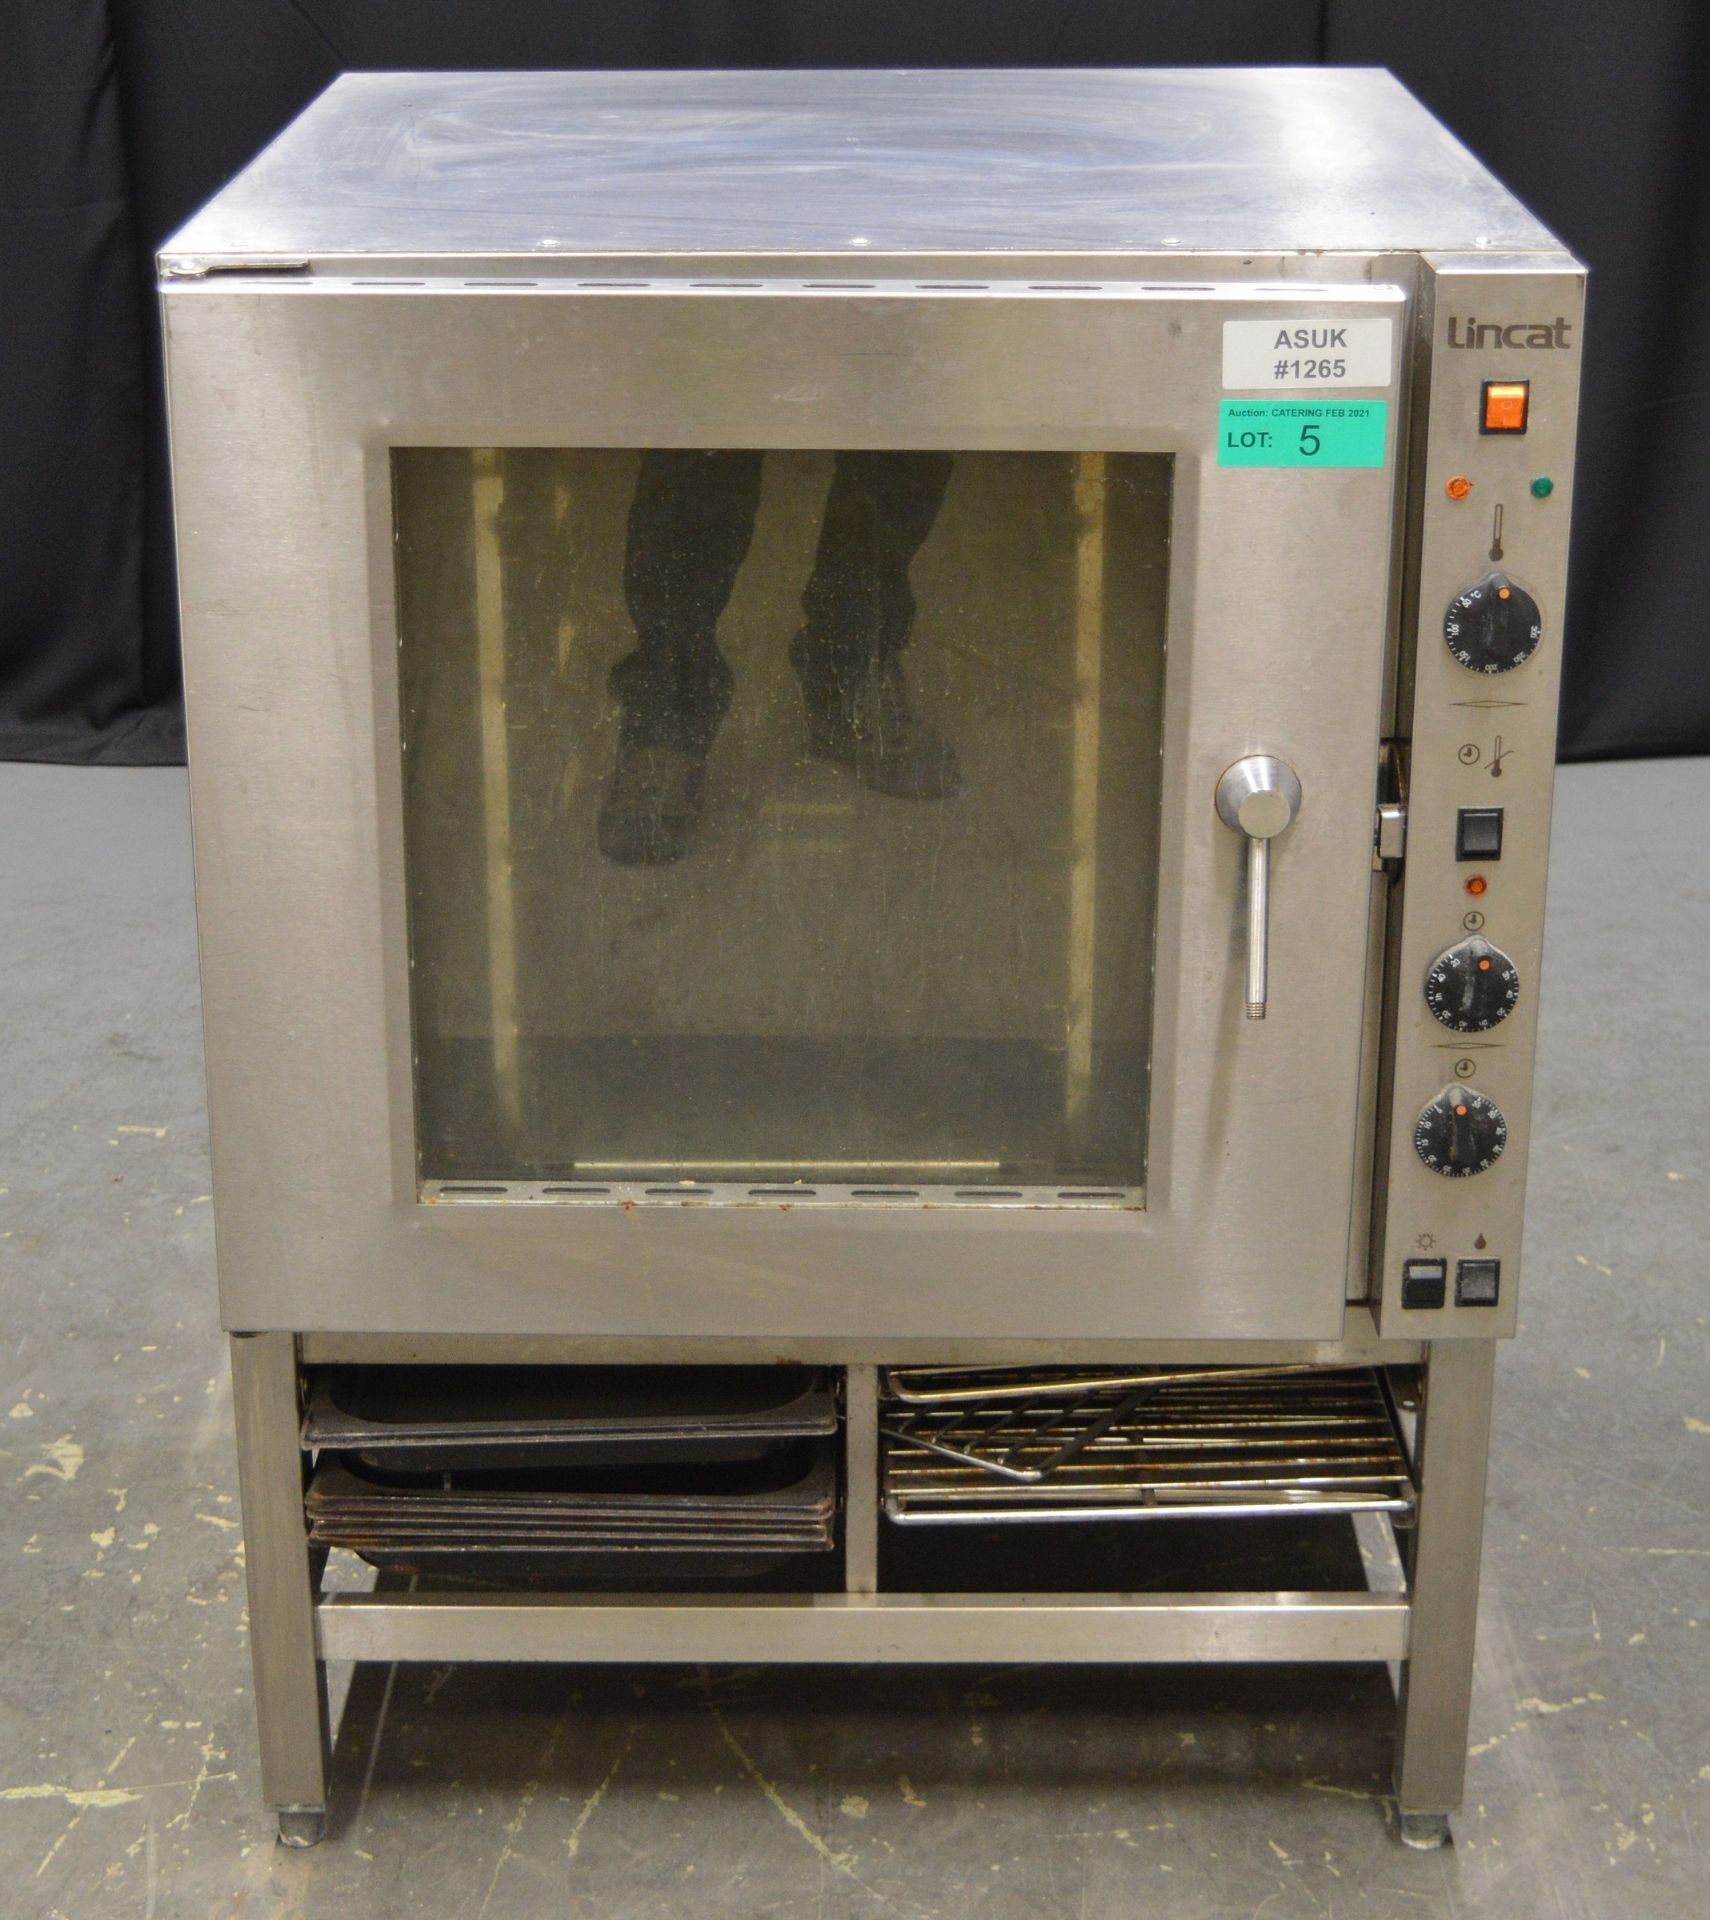 Lincat EC09 Electric Convection Oven on Stand - 400v